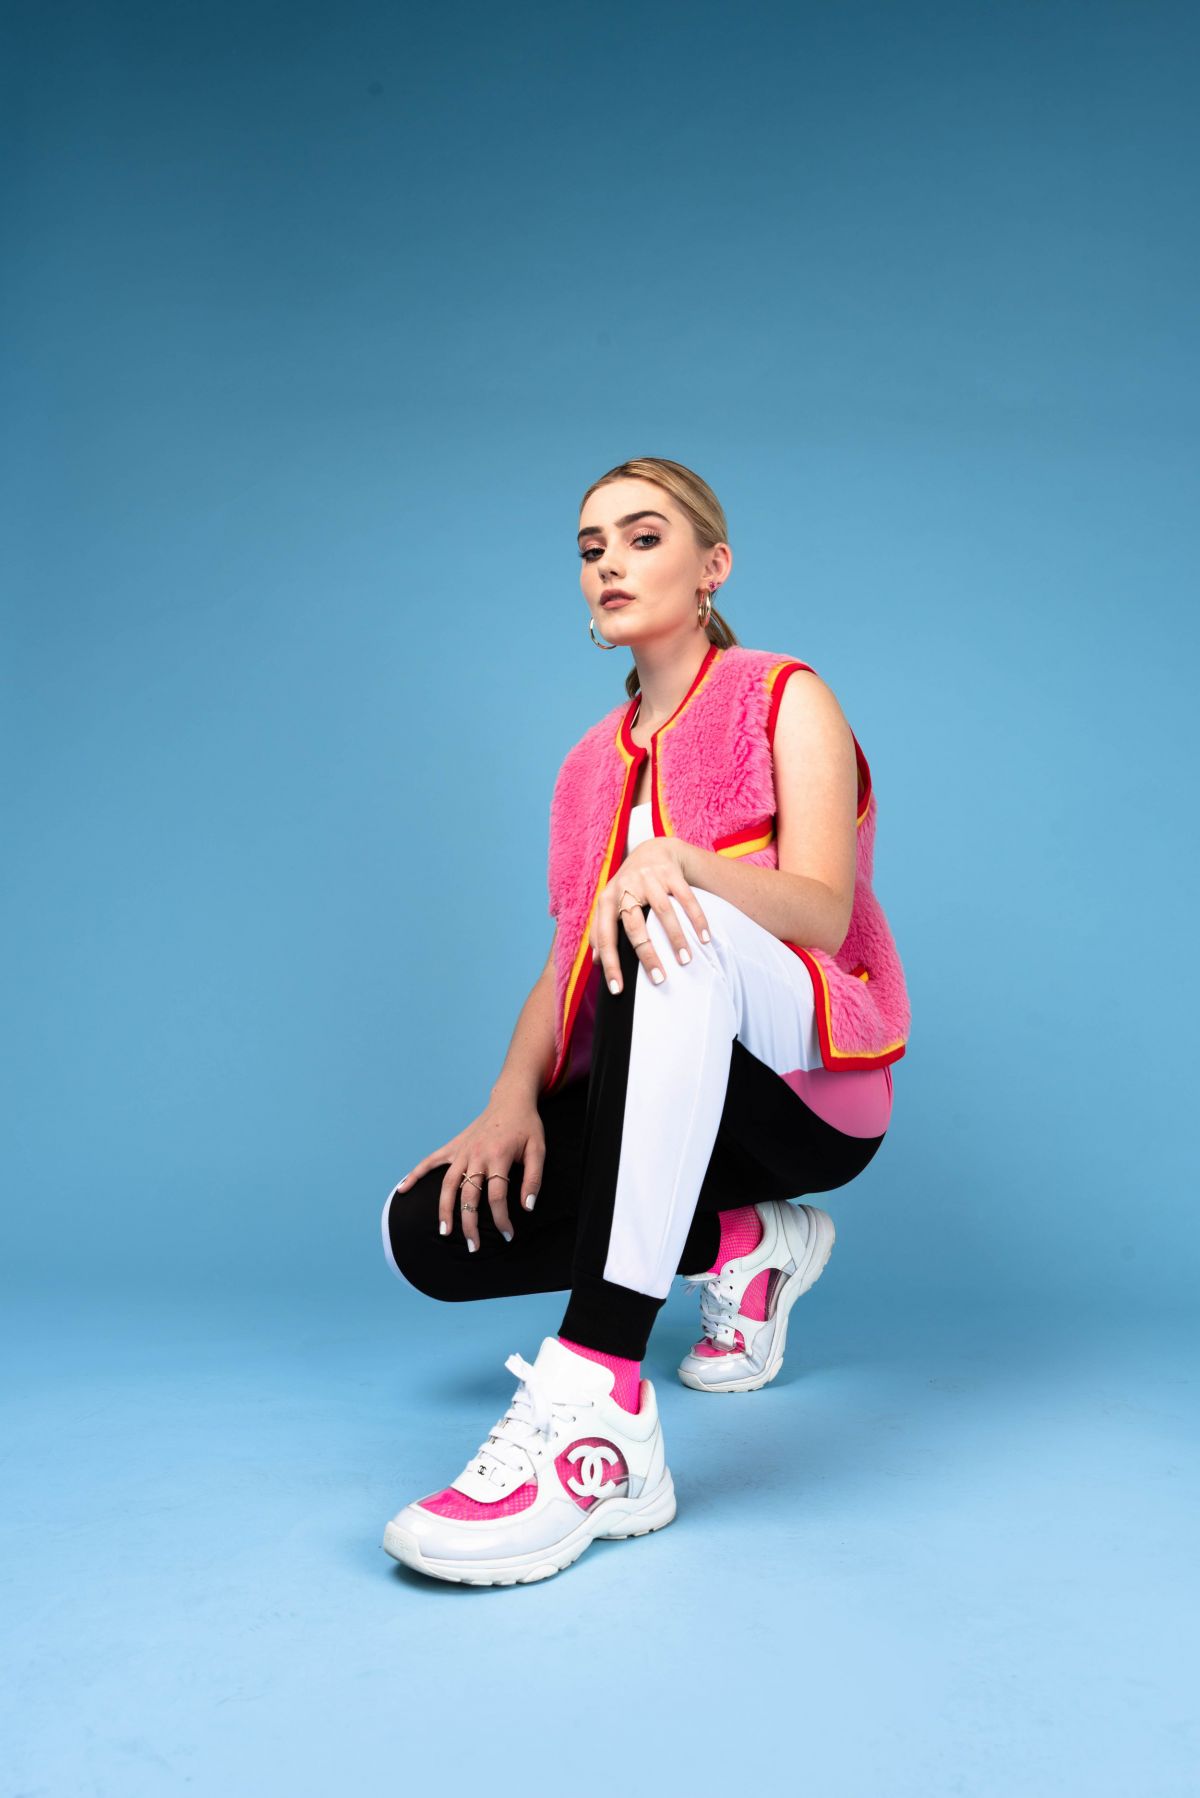 MEG DONNELLY at a Photoshoot, May 2019 – HawtCelebs